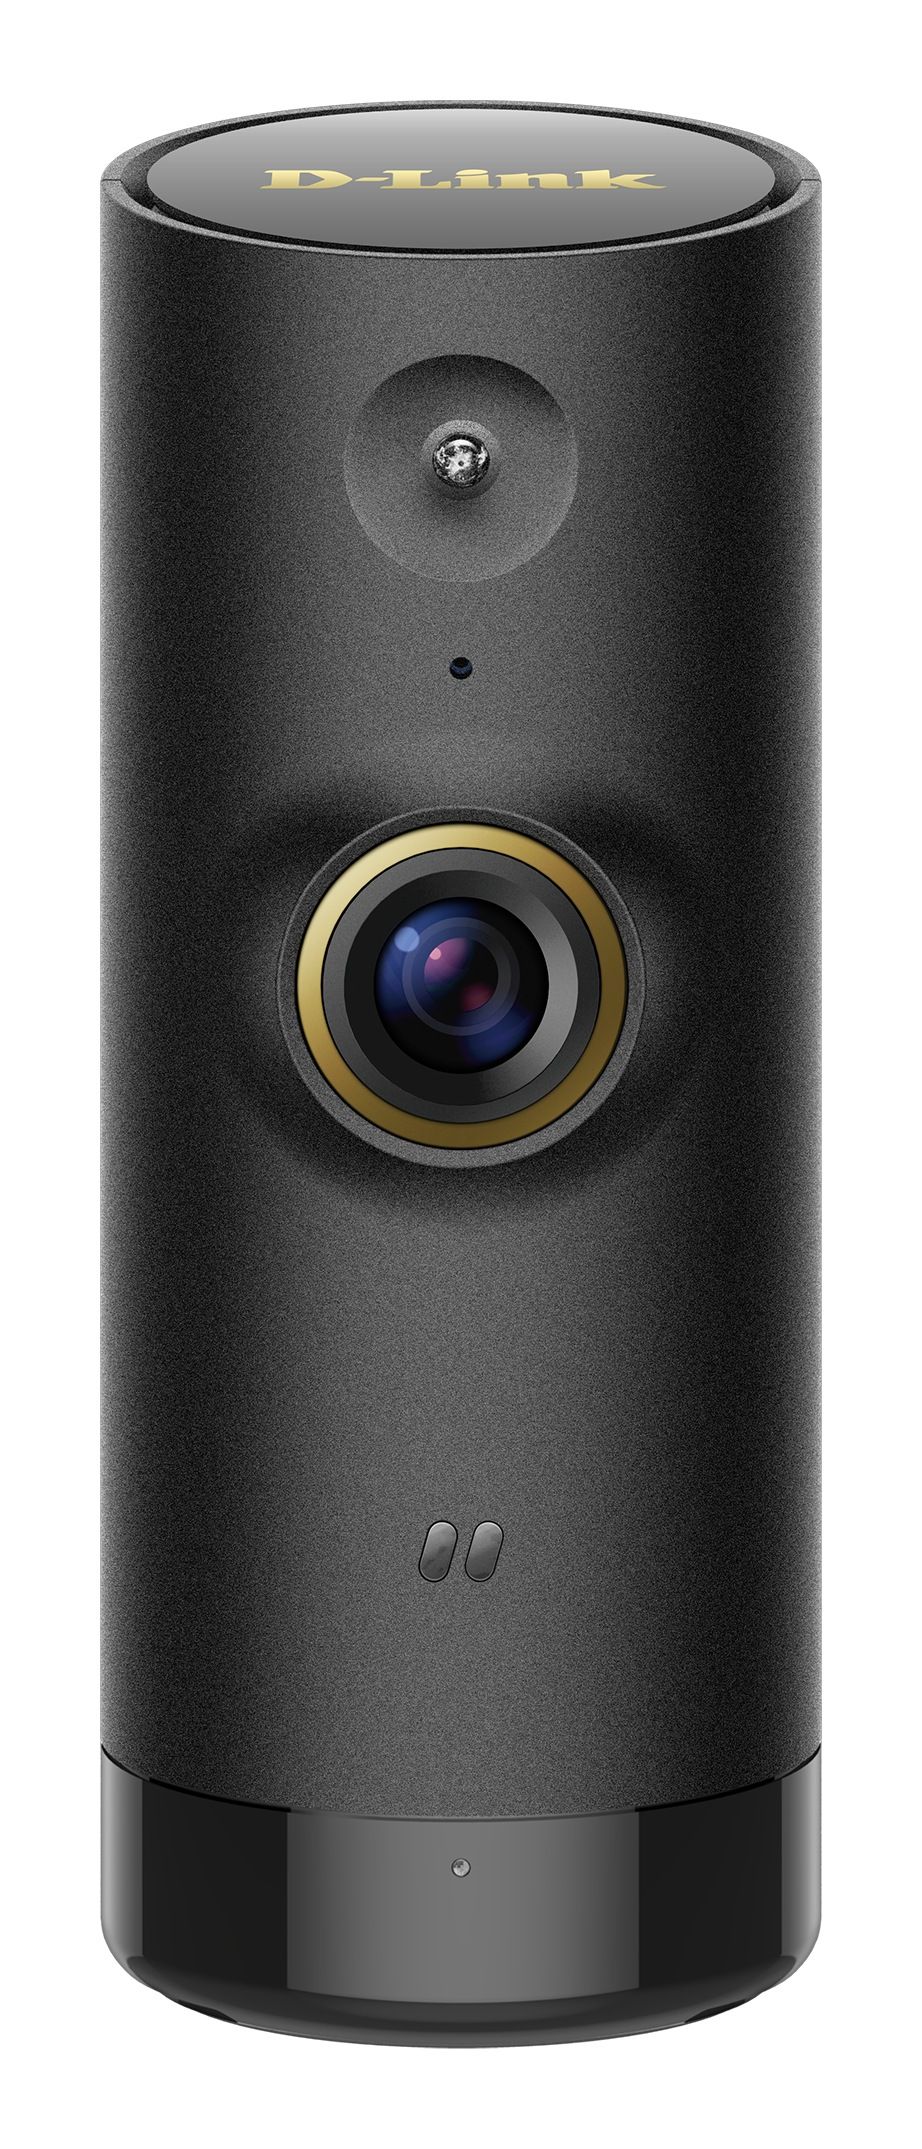 D-link Compact Full HD wifi camera, DCS-6100LH; Video resolution: 1080p , Cloud Recording, Supports WPA3™ Encryption, Sound & Motion Detection, up to 5m in the dark, Smart Home Compatible, Remote Access._1